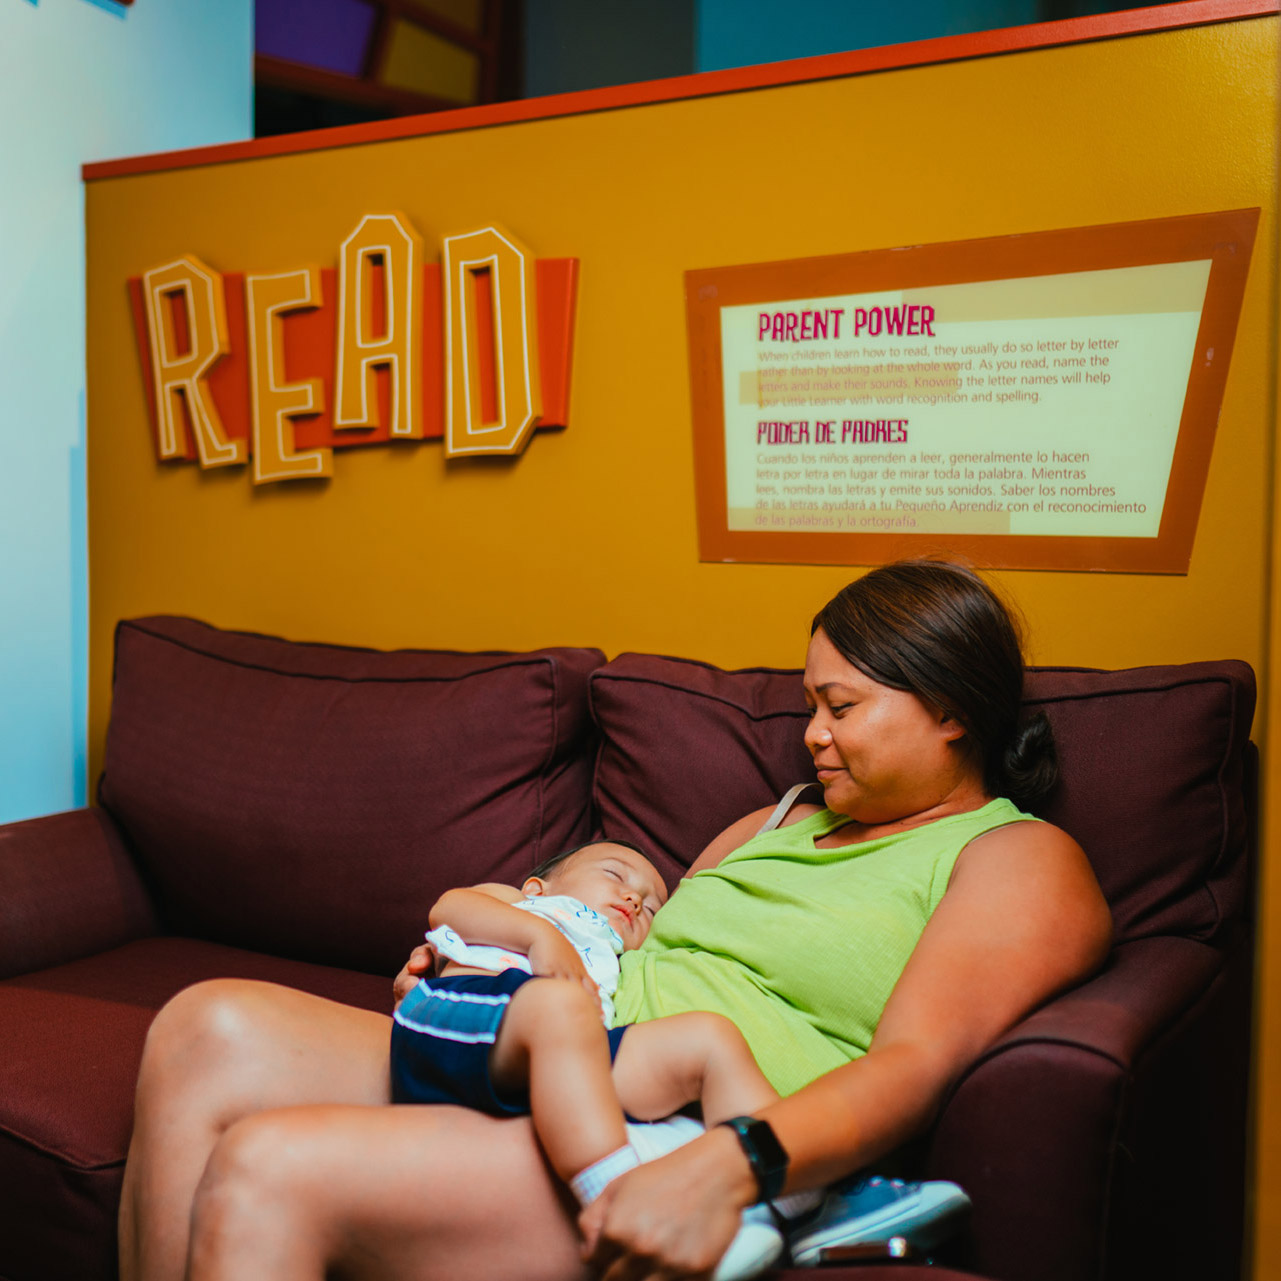 a woman on a couch holds a sleeping toddler in her lap in front of a sign that says "read" at the Discovery Children's Museum